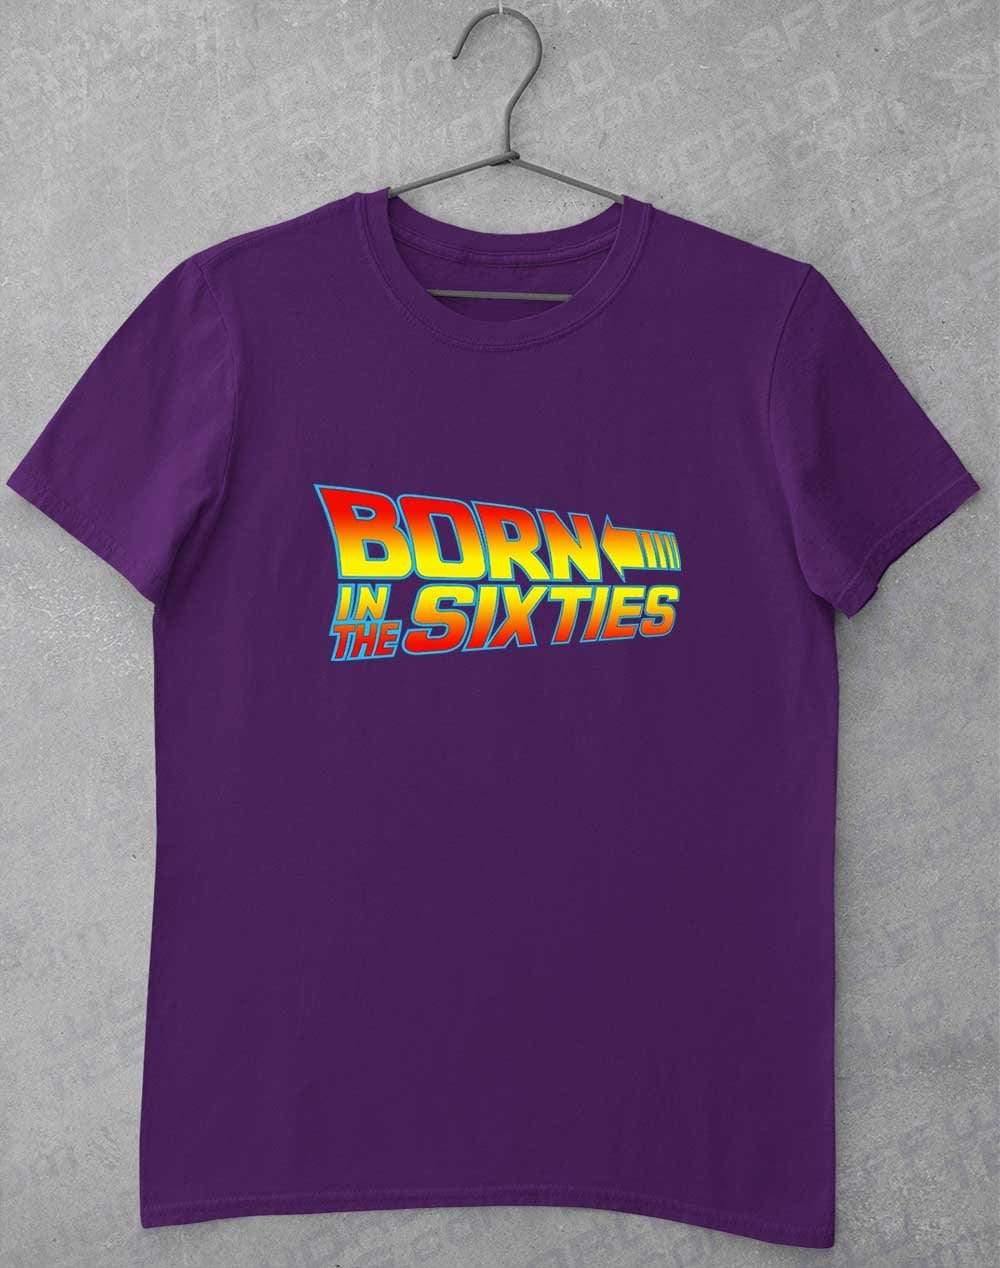 Born in the... (CHOOSE YOUR DECADE!) T-shirt THE SIXTIES - Purple / S  - Off World Tees